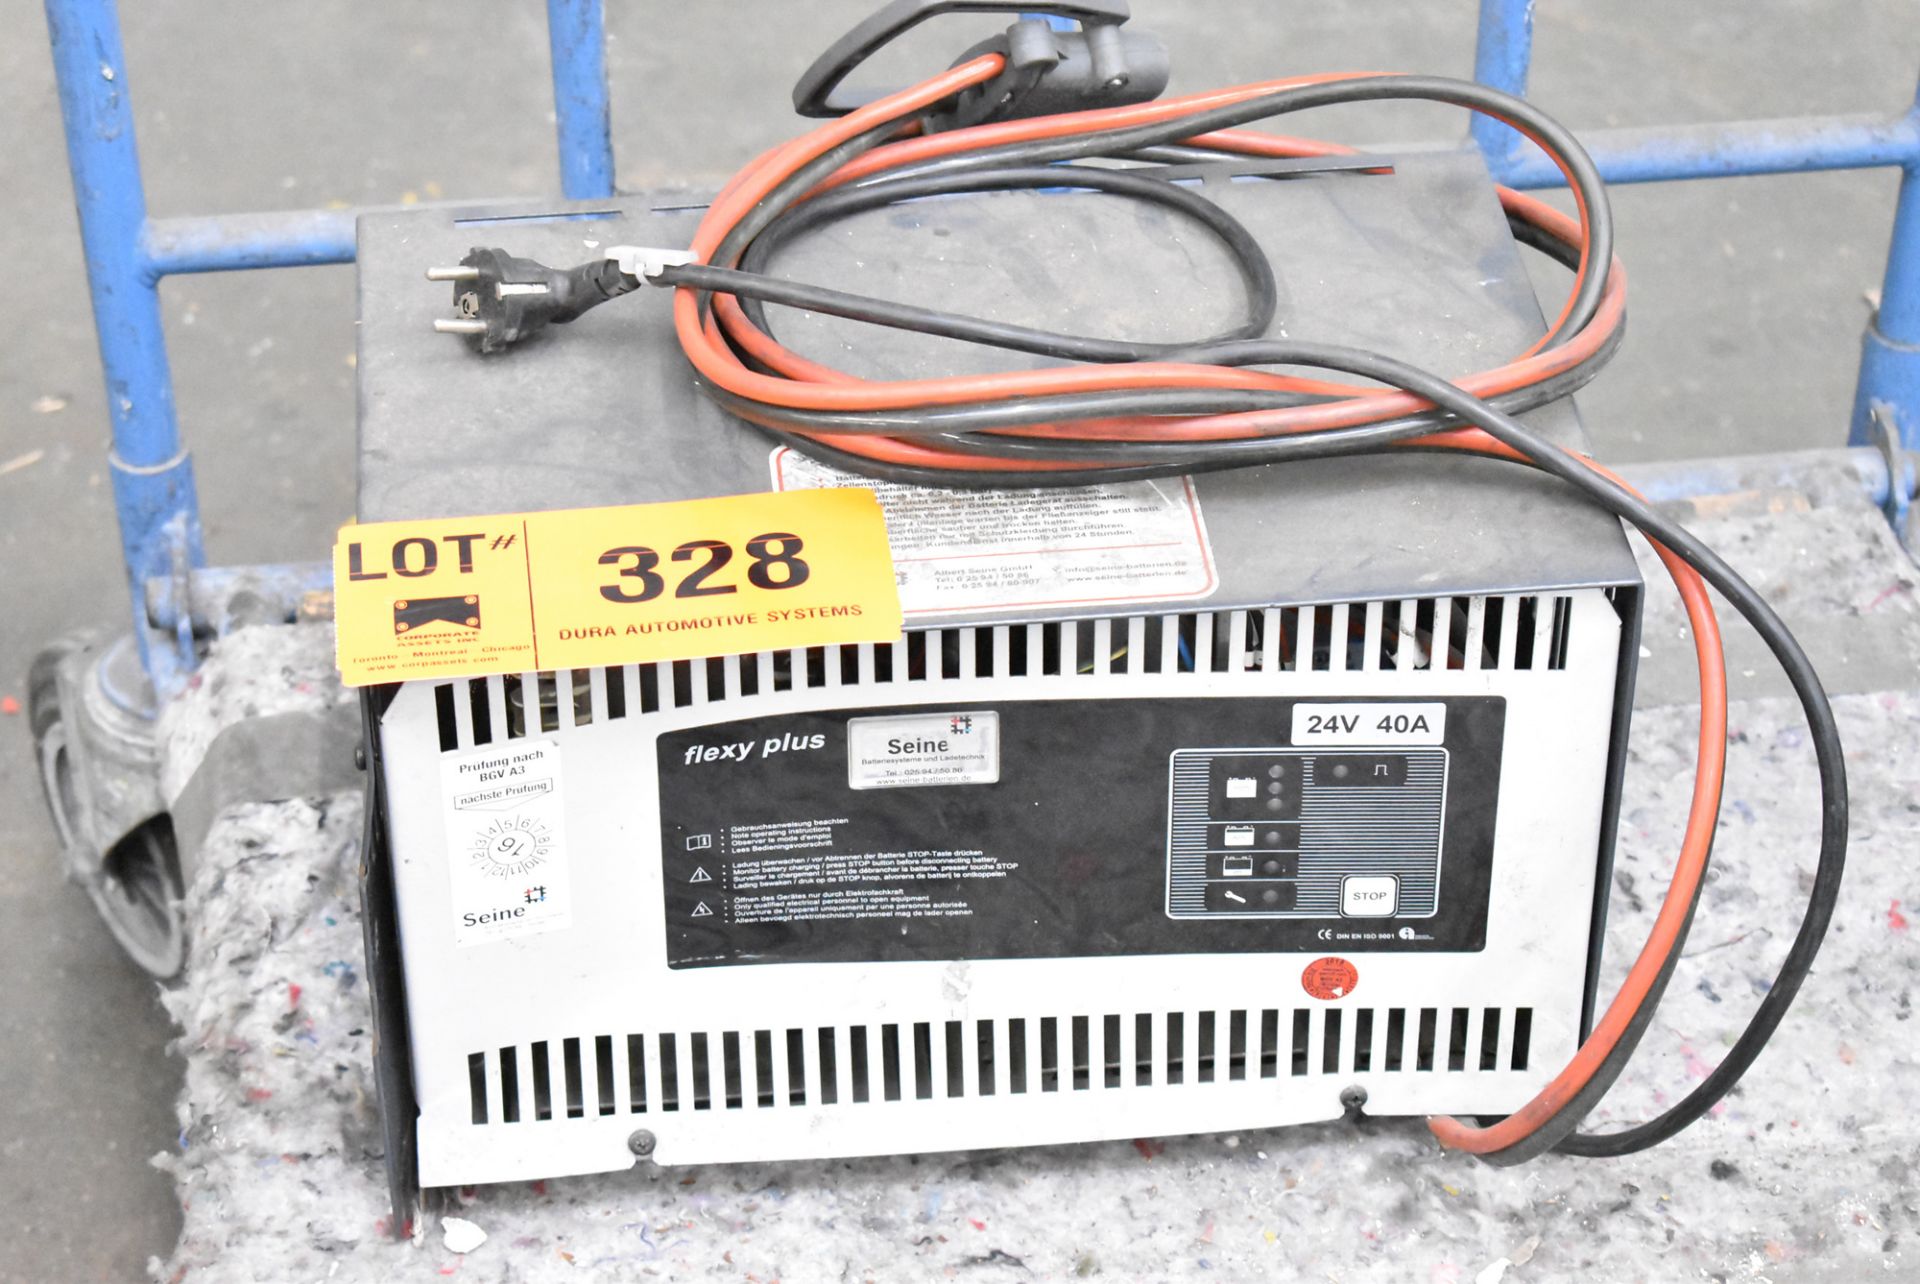 24 V BATTERY CHARGER, S/N N/A (BAU 3) [Removal Fee = € 11 + applicable VAT - Gerritsen Projects BV]